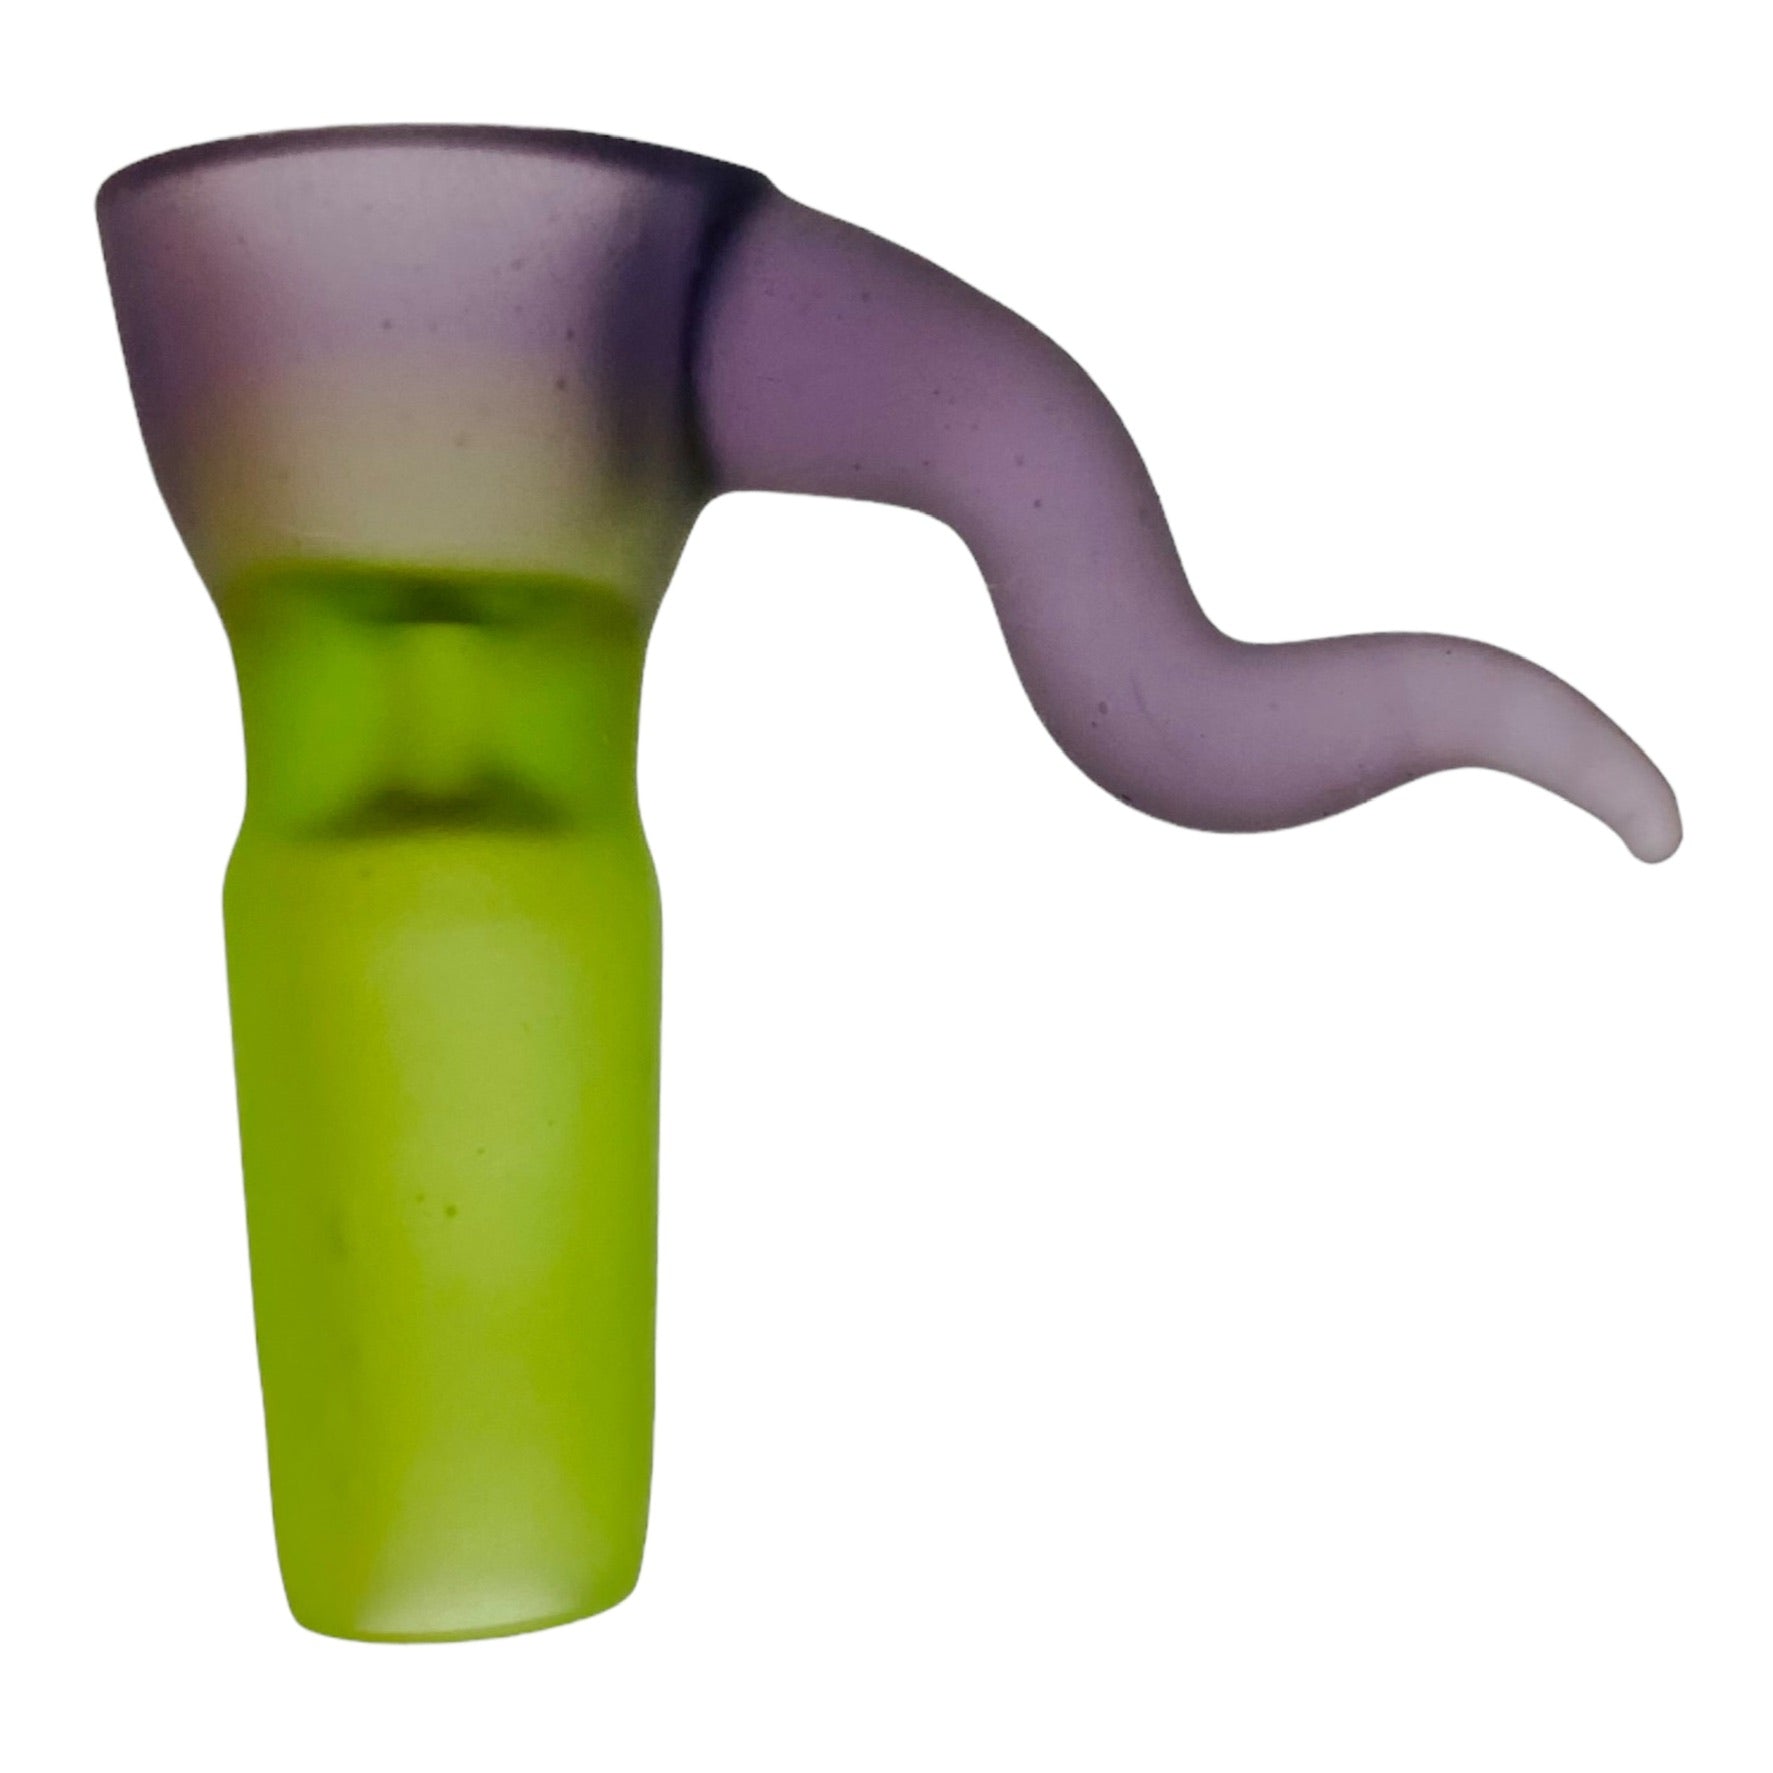 Optera Glass - Sandblasted Green And Purple With Purple Handle - 14mm Bowl Piece